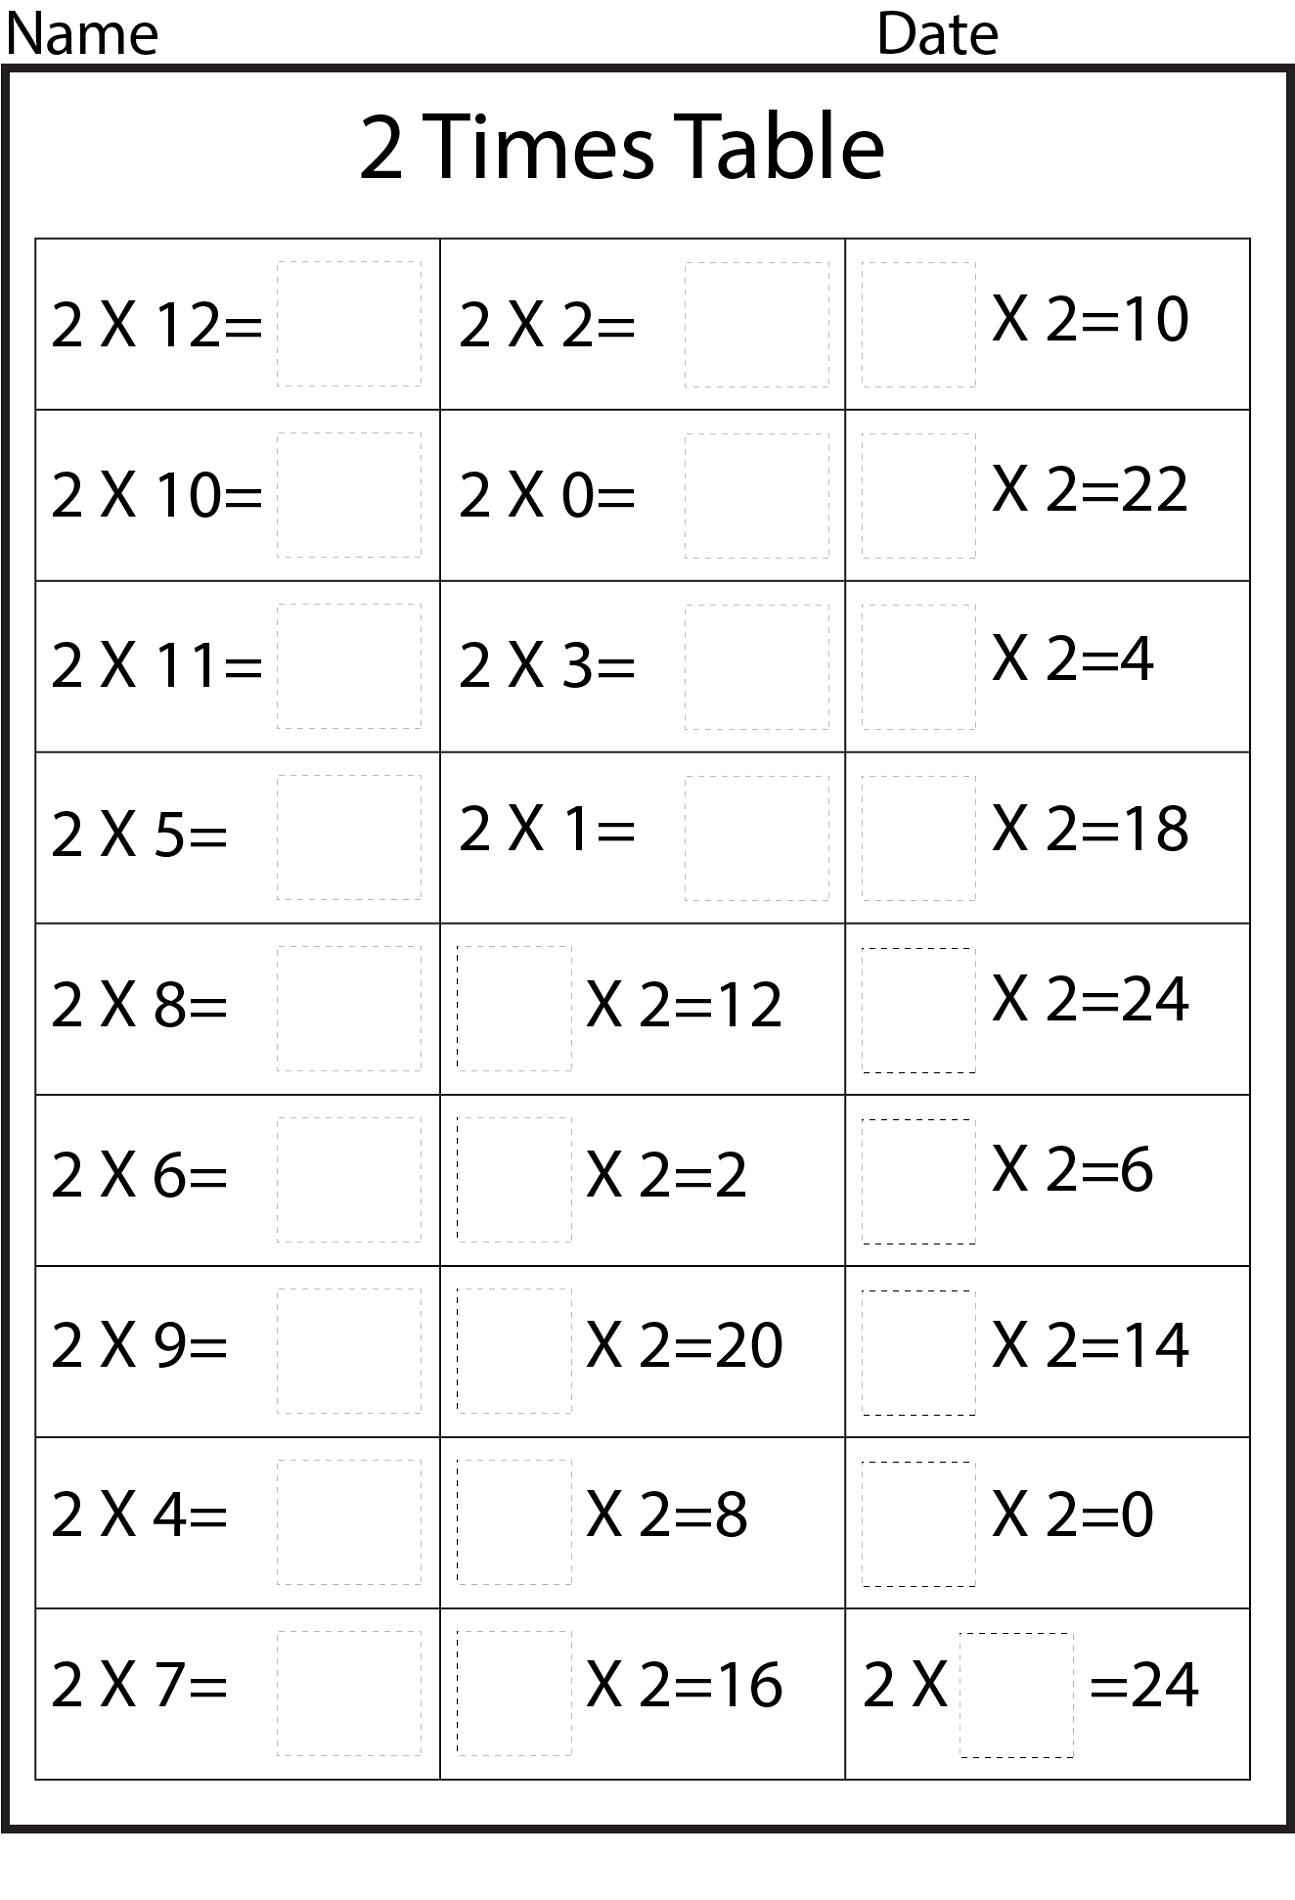 multiplication chart by 2